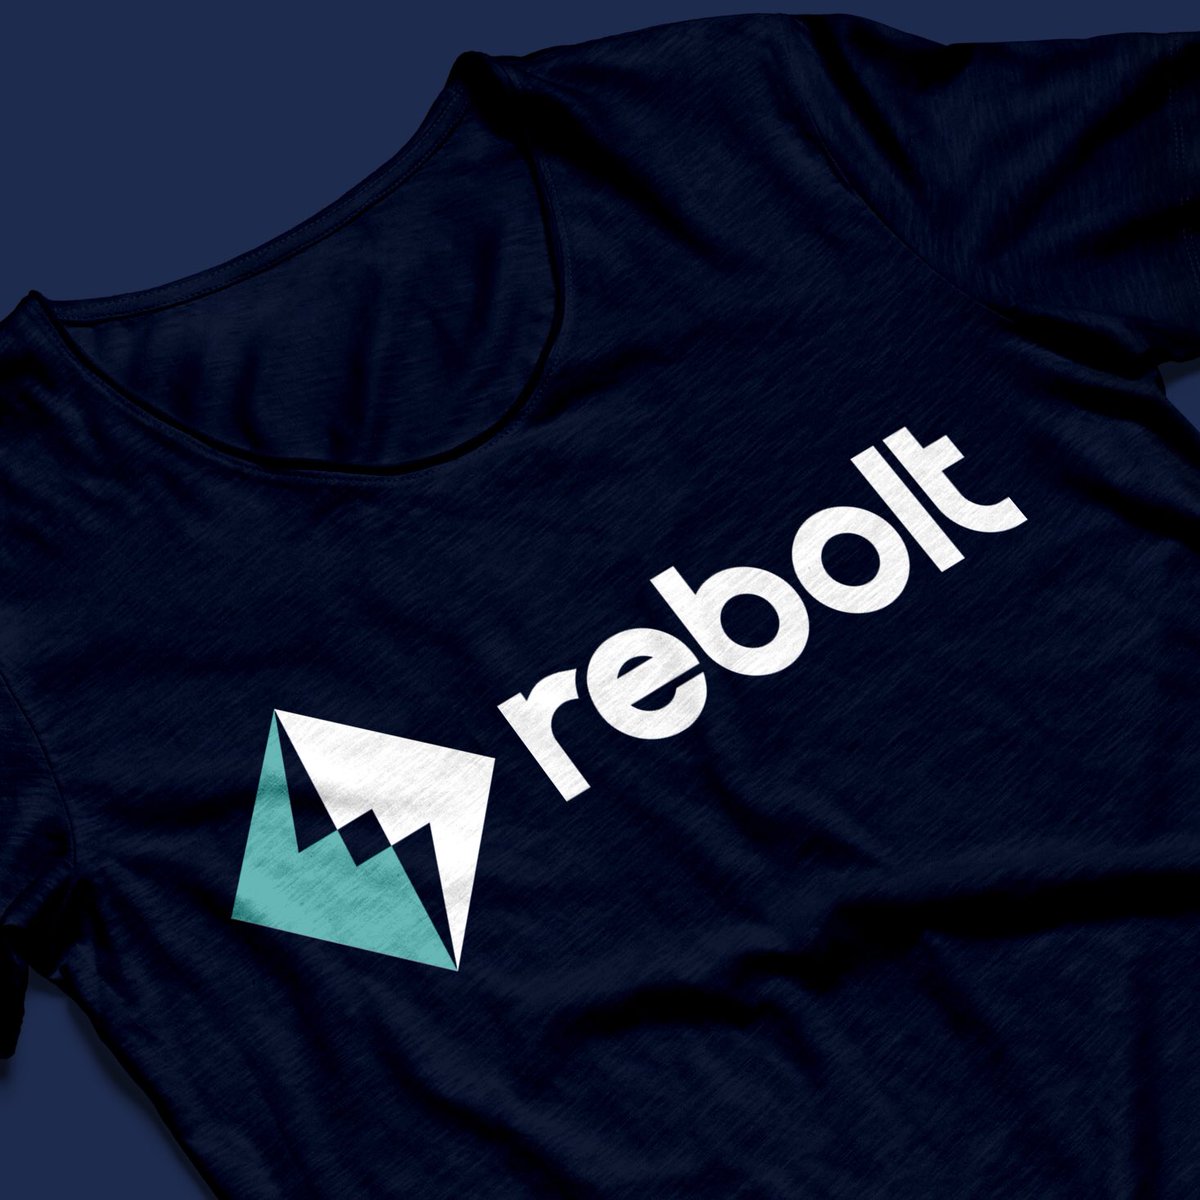 The Rebolt Project (contd)So I worked on a couple of sketches and we collectively agreed on going with this design direction as given in this link:  https://www.instagram.com/p/B70lCAlA3Cv/?igshid=8xwydqm5tn70Here as some mockup presentations however.  #brandidentity  #GraphicDesign  #WeAreNigerianCreatives  #logo